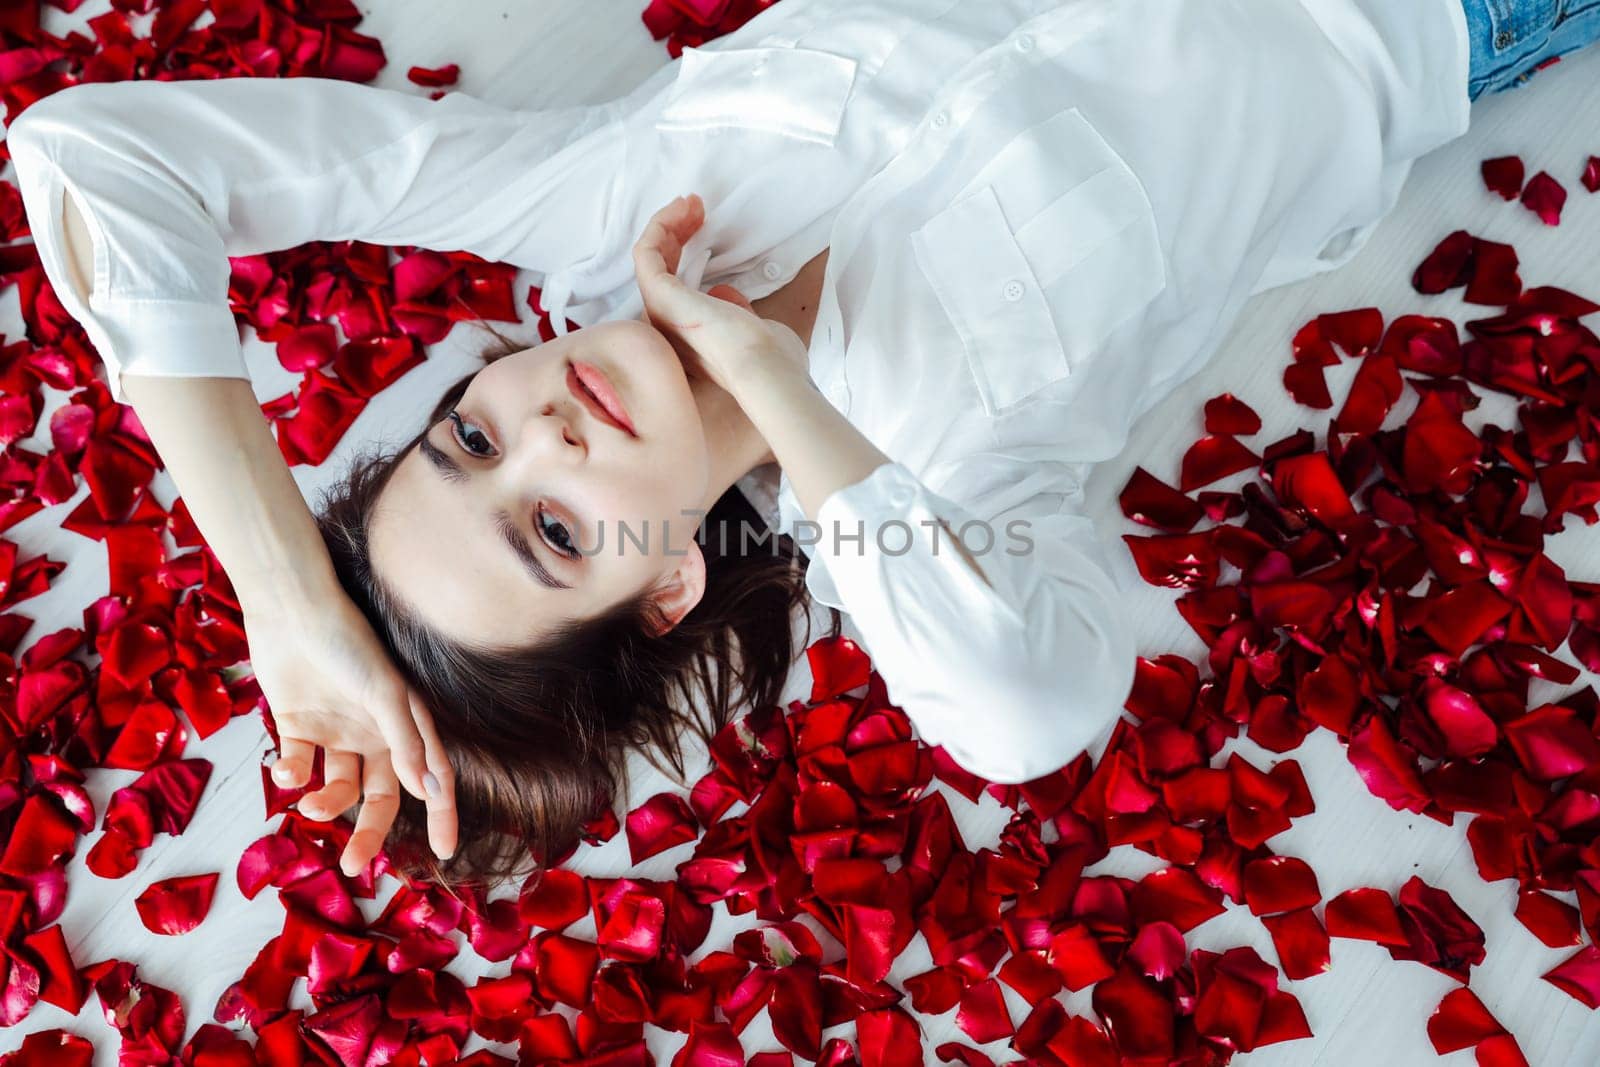 a woman lies in red rose petals romance holiday